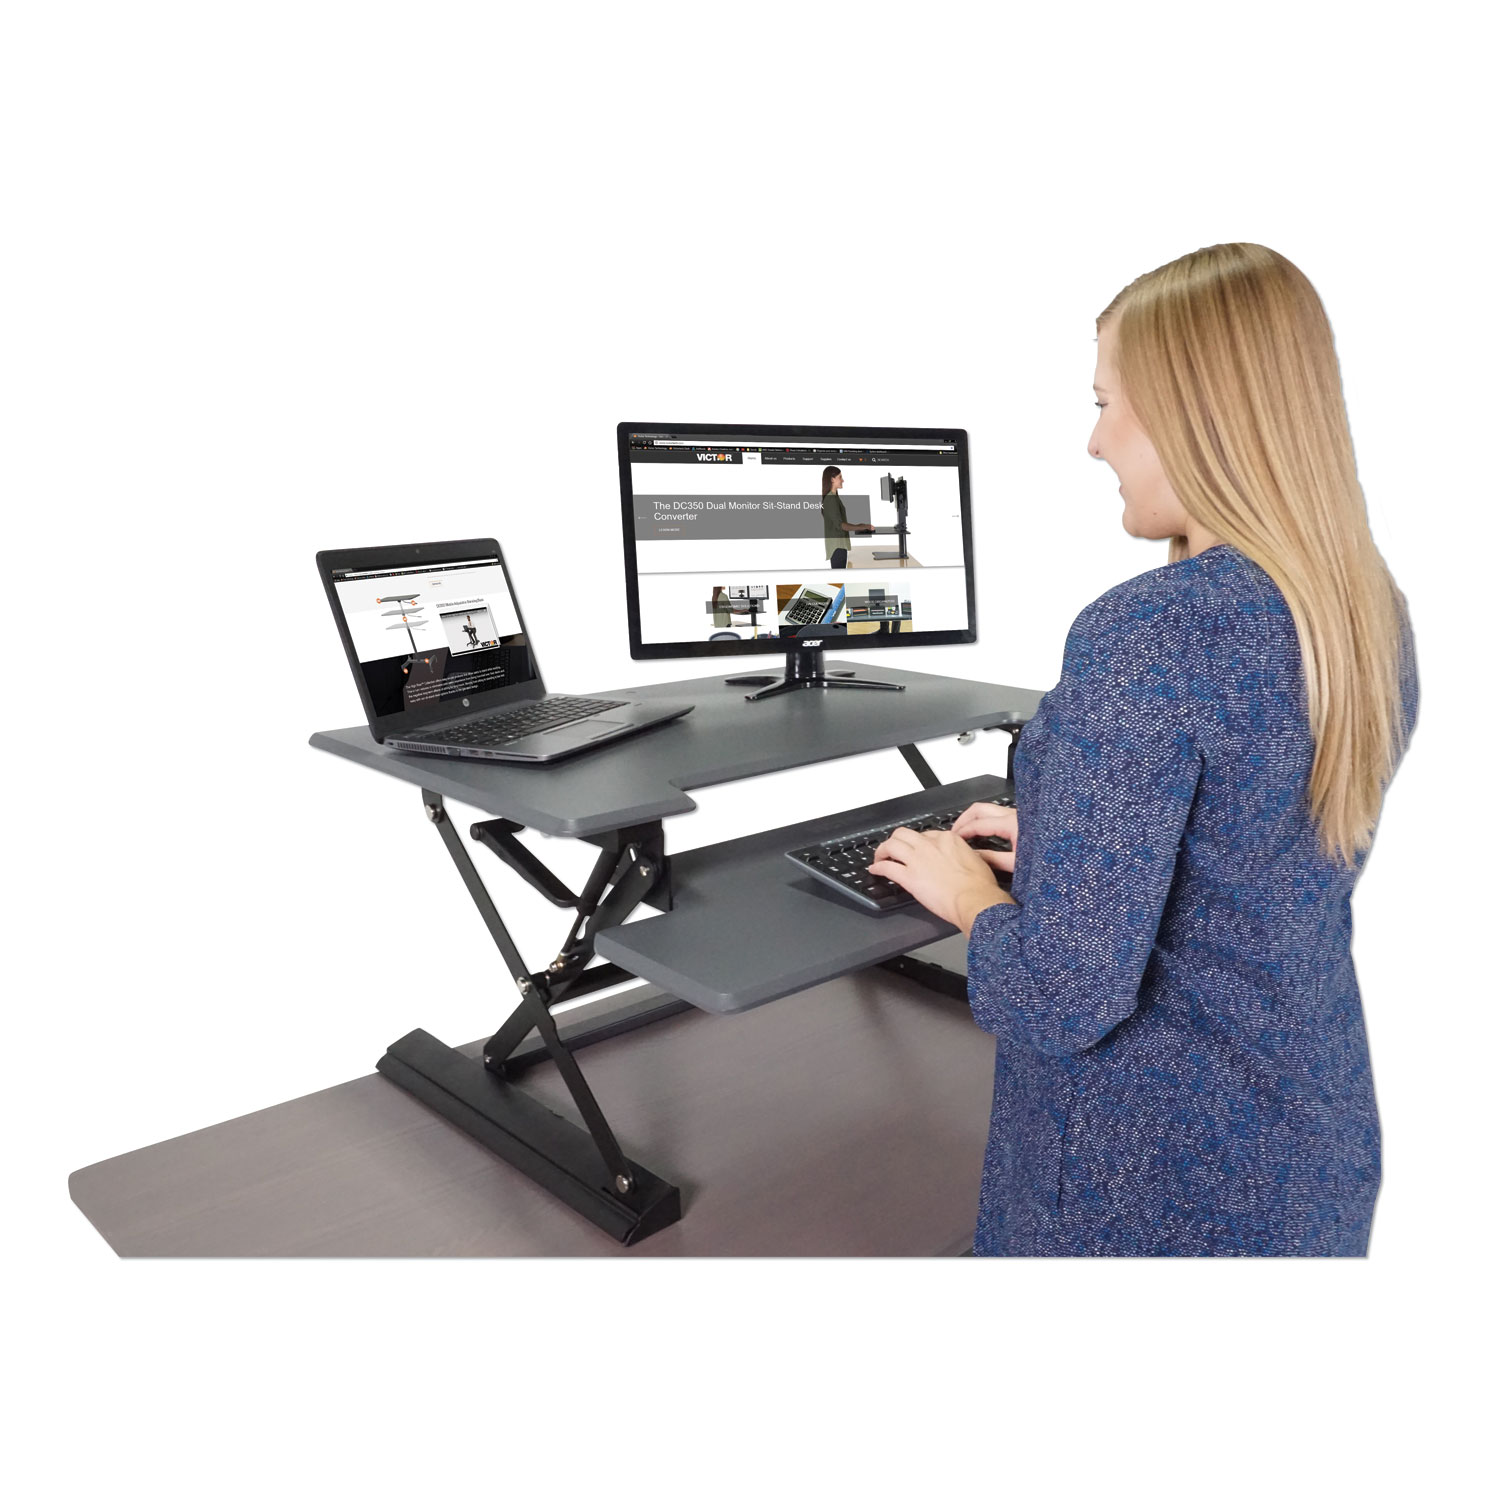  Victor DCX760G High Rise Height Adjustable Standing Desk with Keyboard Tray, 36w x 31.25d x 21h, Gray/Black (VCTDCX760) 